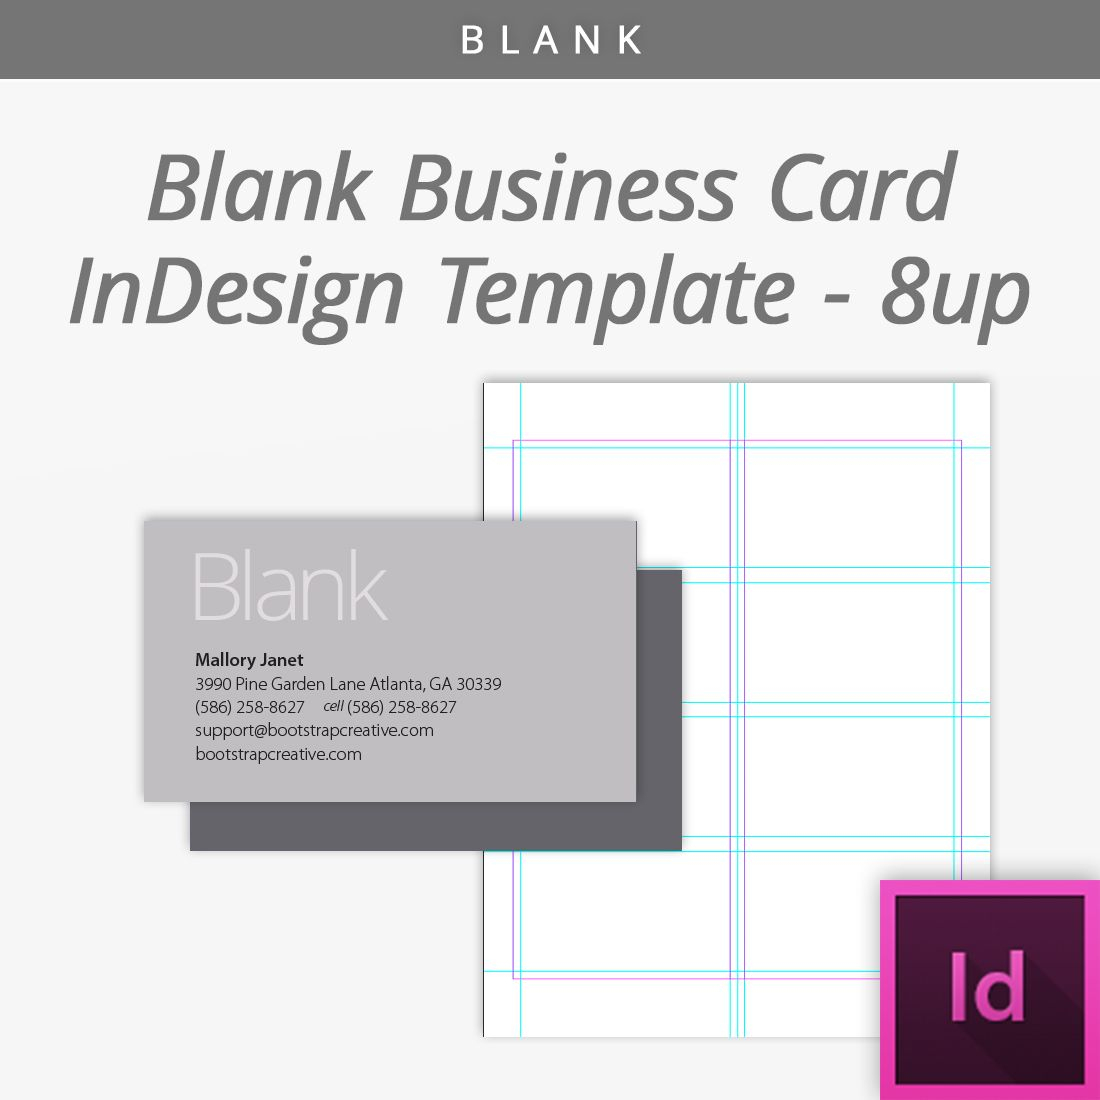 Blank Indesign Business Card Template 8 Up Free Download - Free Printable Blank Business Cards